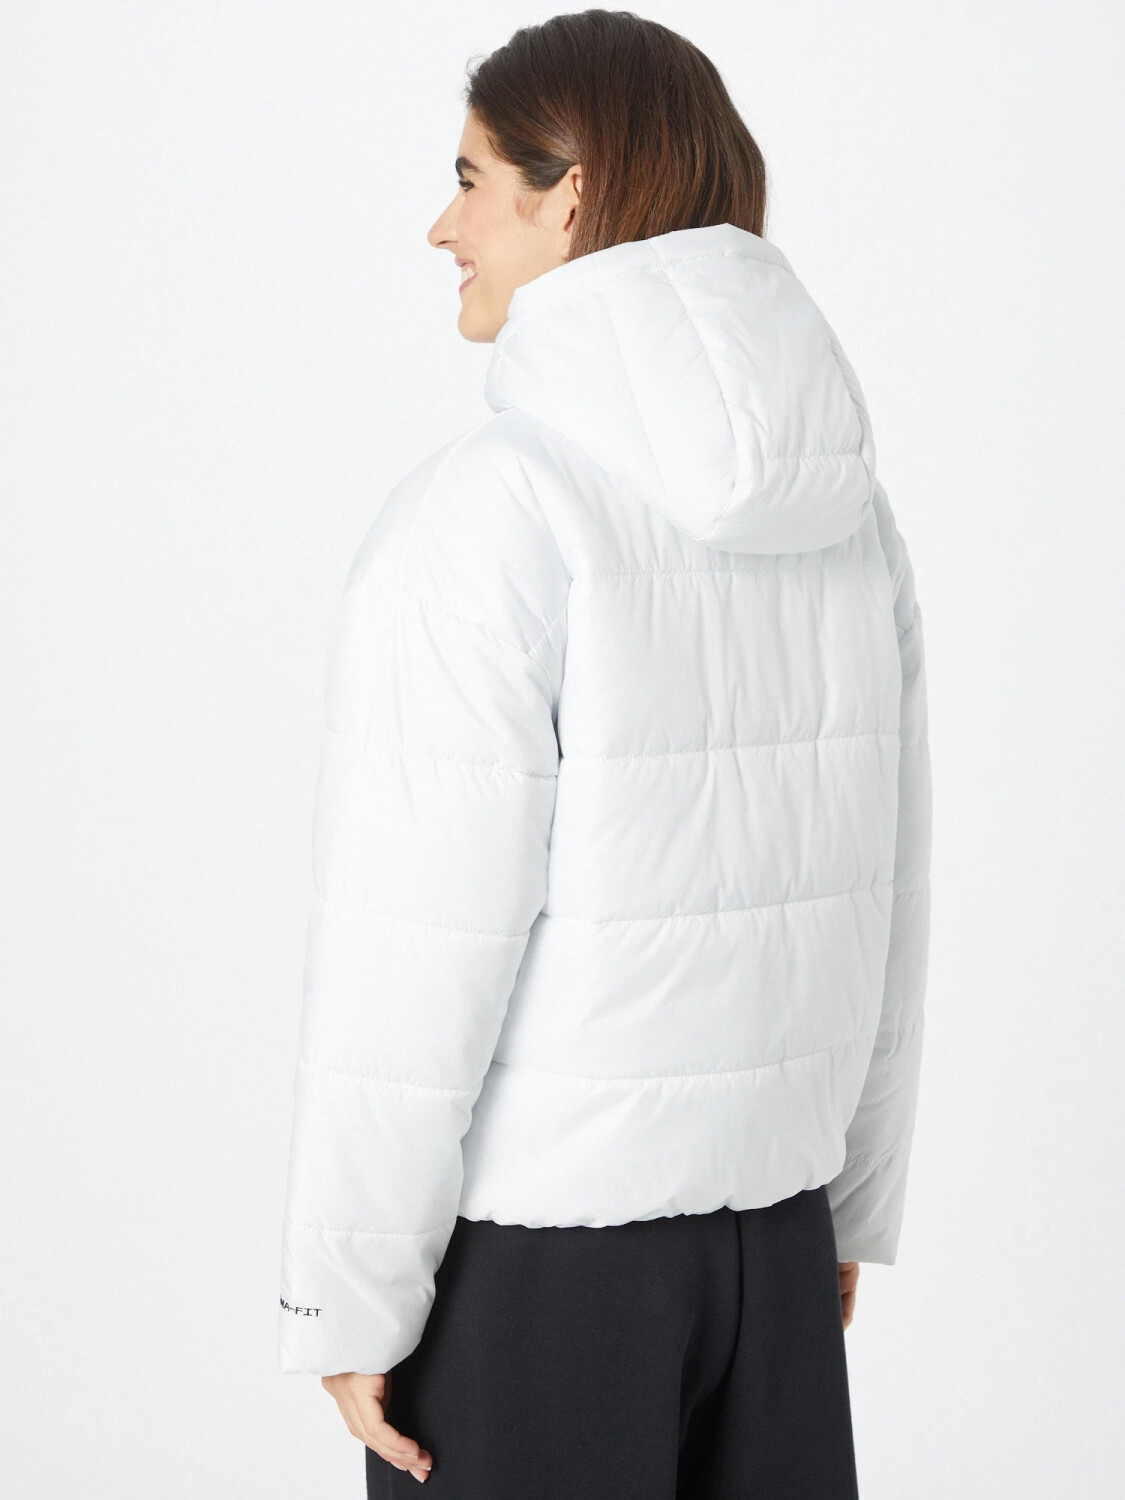 CHAQUETA BLANCA MUJER THERMA-FIT DX1797